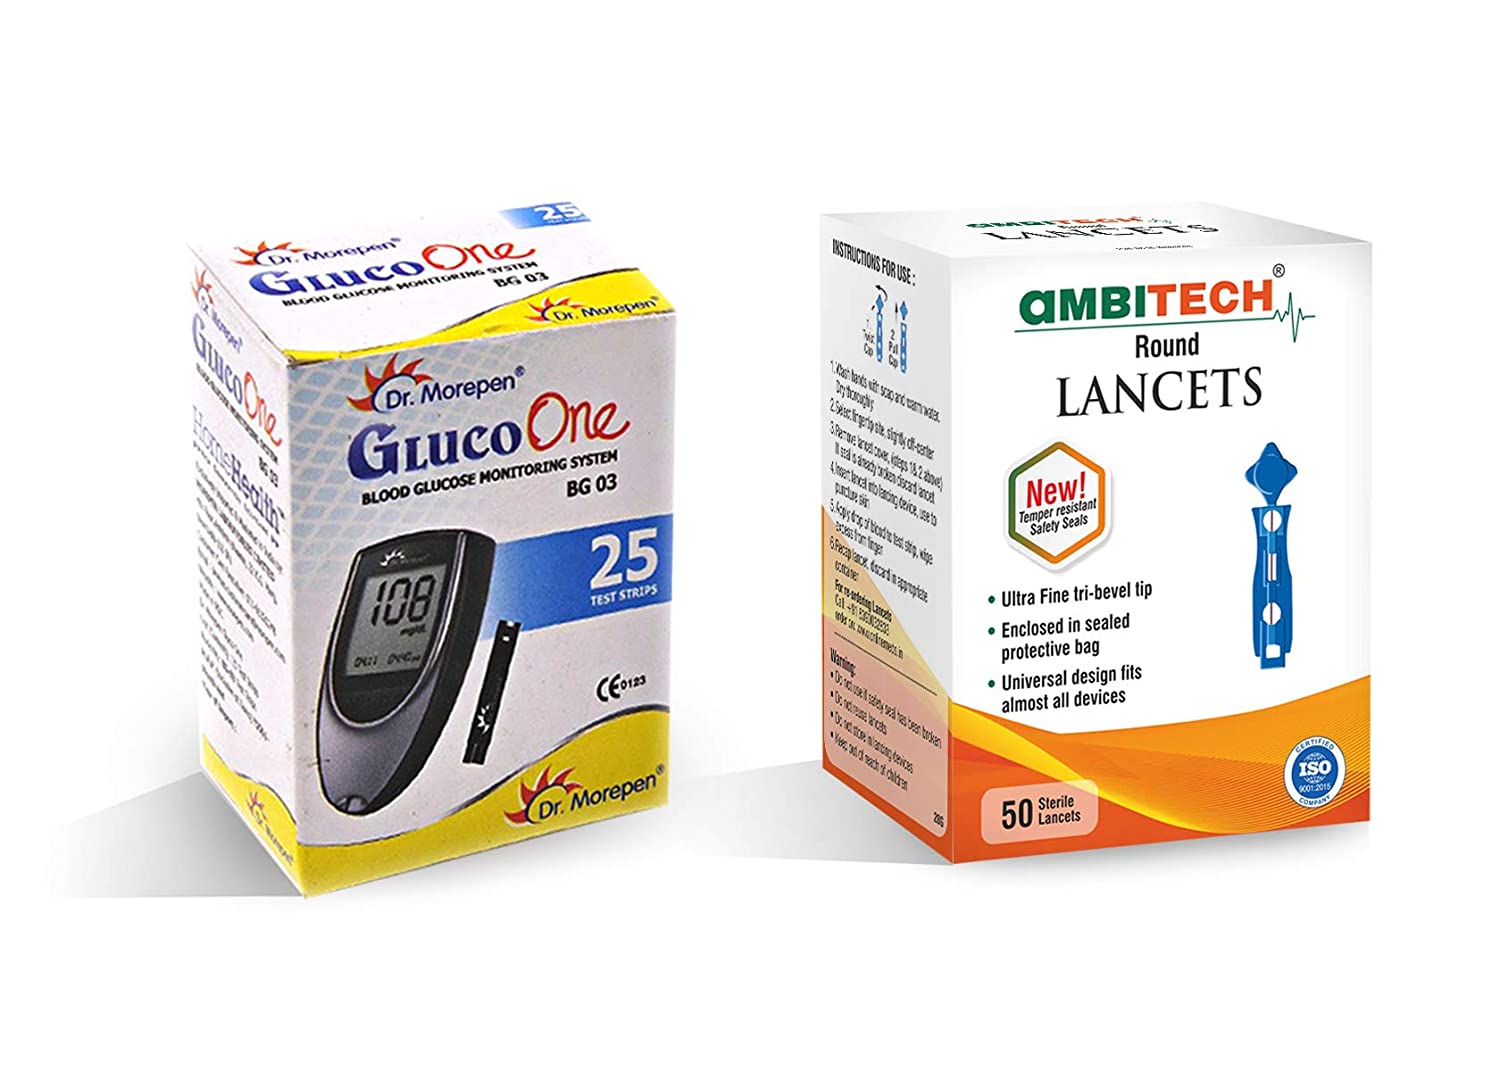 DR. MOREPEN BG-03 25 Test Strips with Ambitech 50 Round Lancets Combo (No Glucometer)